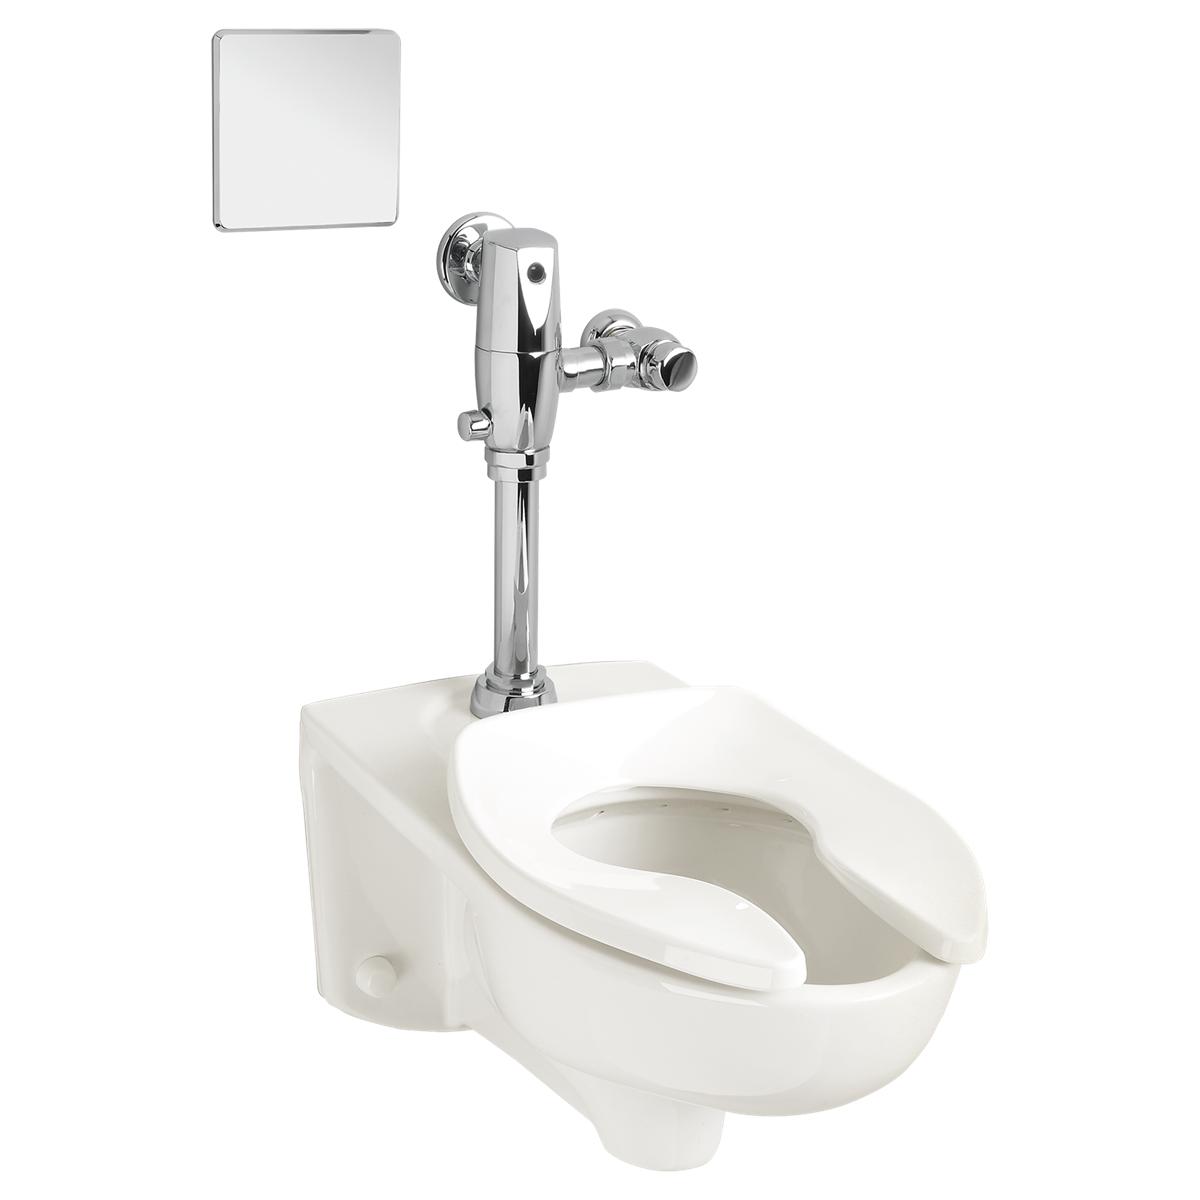 White Wall Hung 1.1 to 1.6 gpf Toilet Bowl Elongated ADA Compliant 